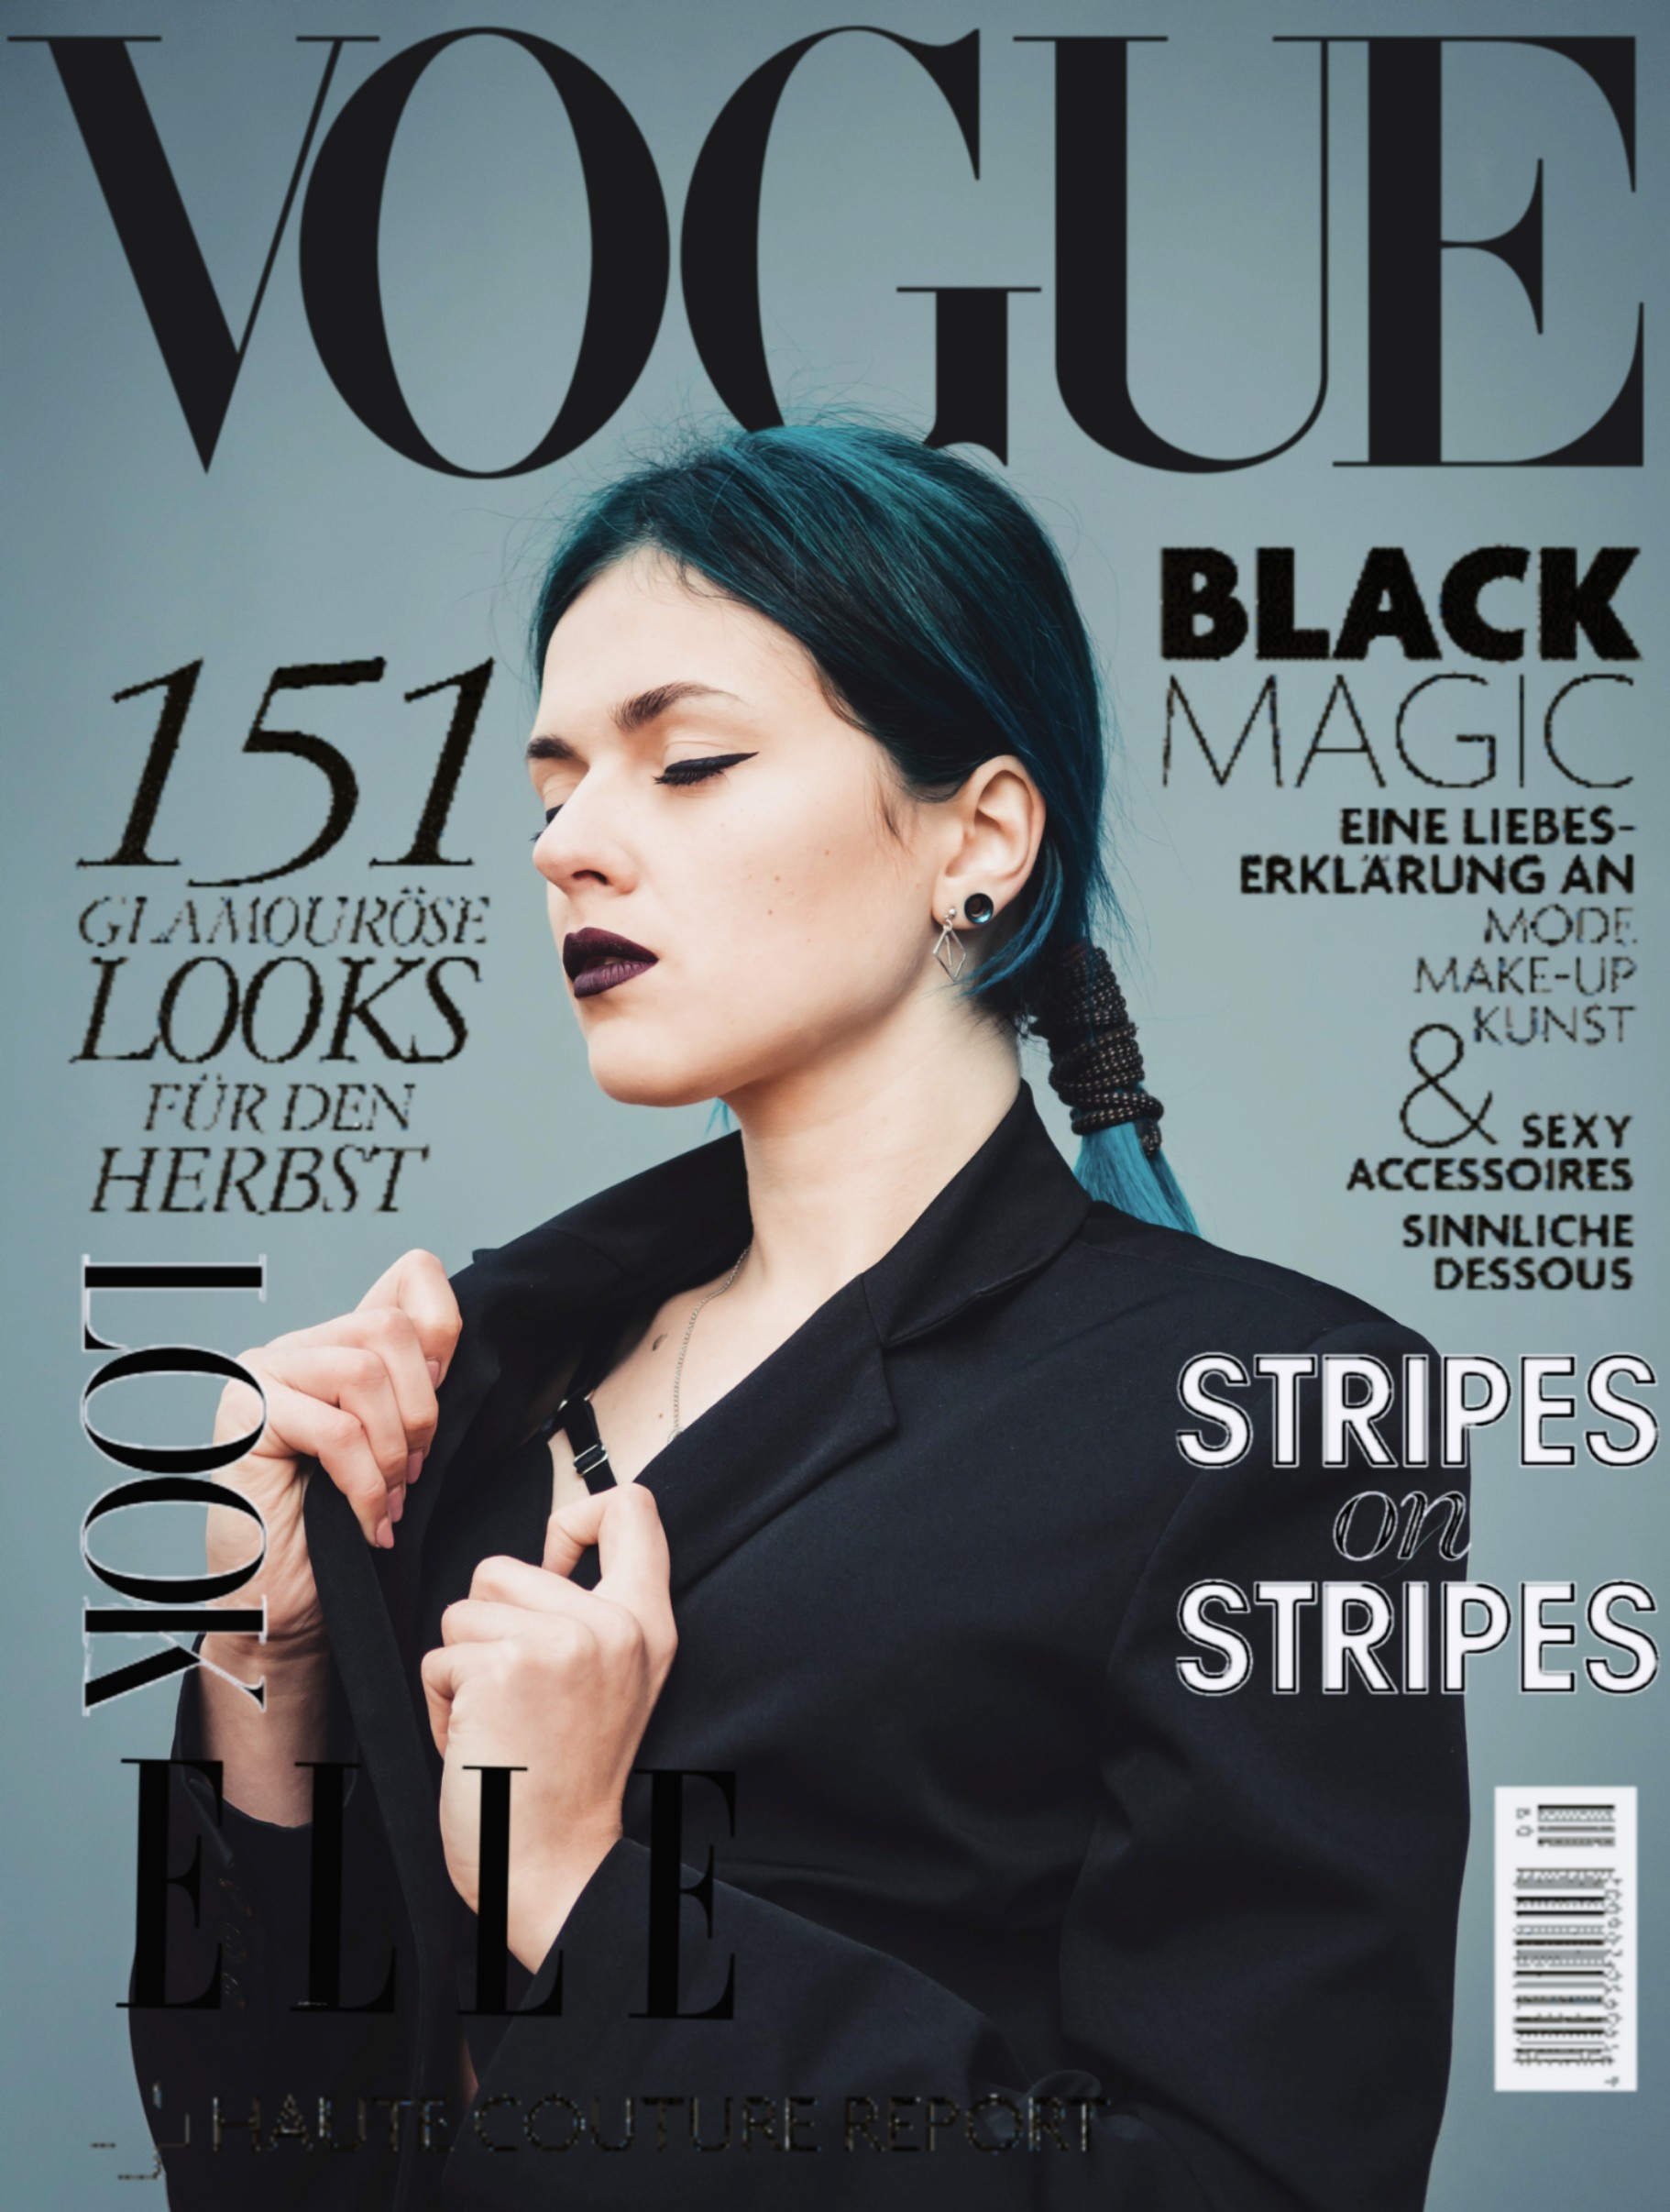  Magazinecover aesthetic replay vouge vougestyle magazinecover vougemagazine awesome retro vintage aestheticedit#freetoedit #freetoedit #madewithpicsart 